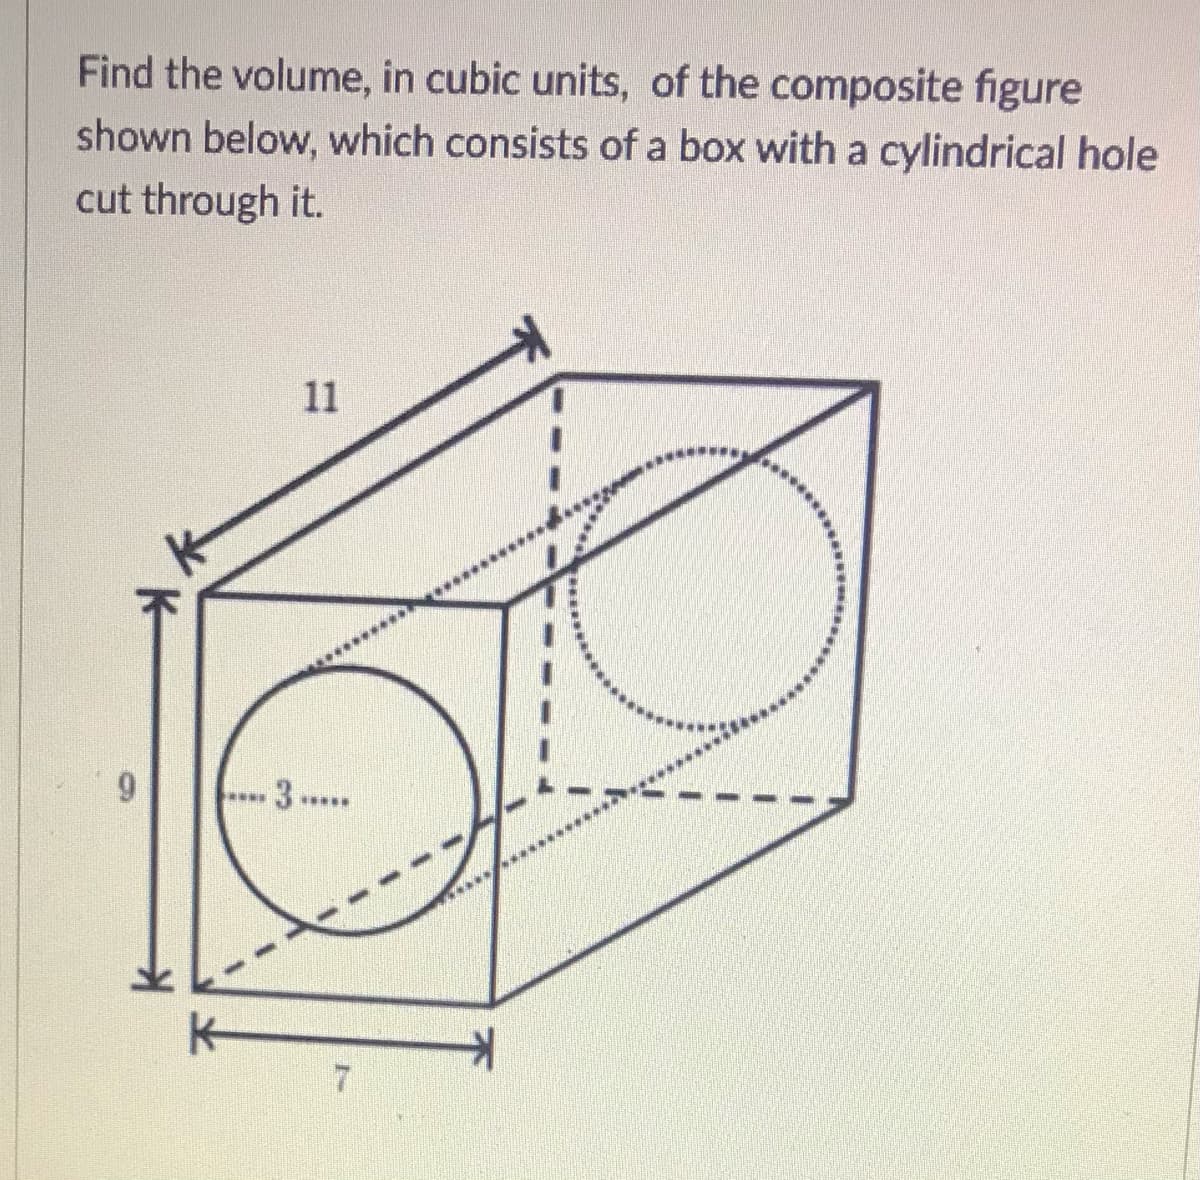 Find the volume, in cubic units, of the composite figure
shown below, which consists of a box with a cylindrical hole
cut through it.
11
3 ..
****
*****
...***...
7.
